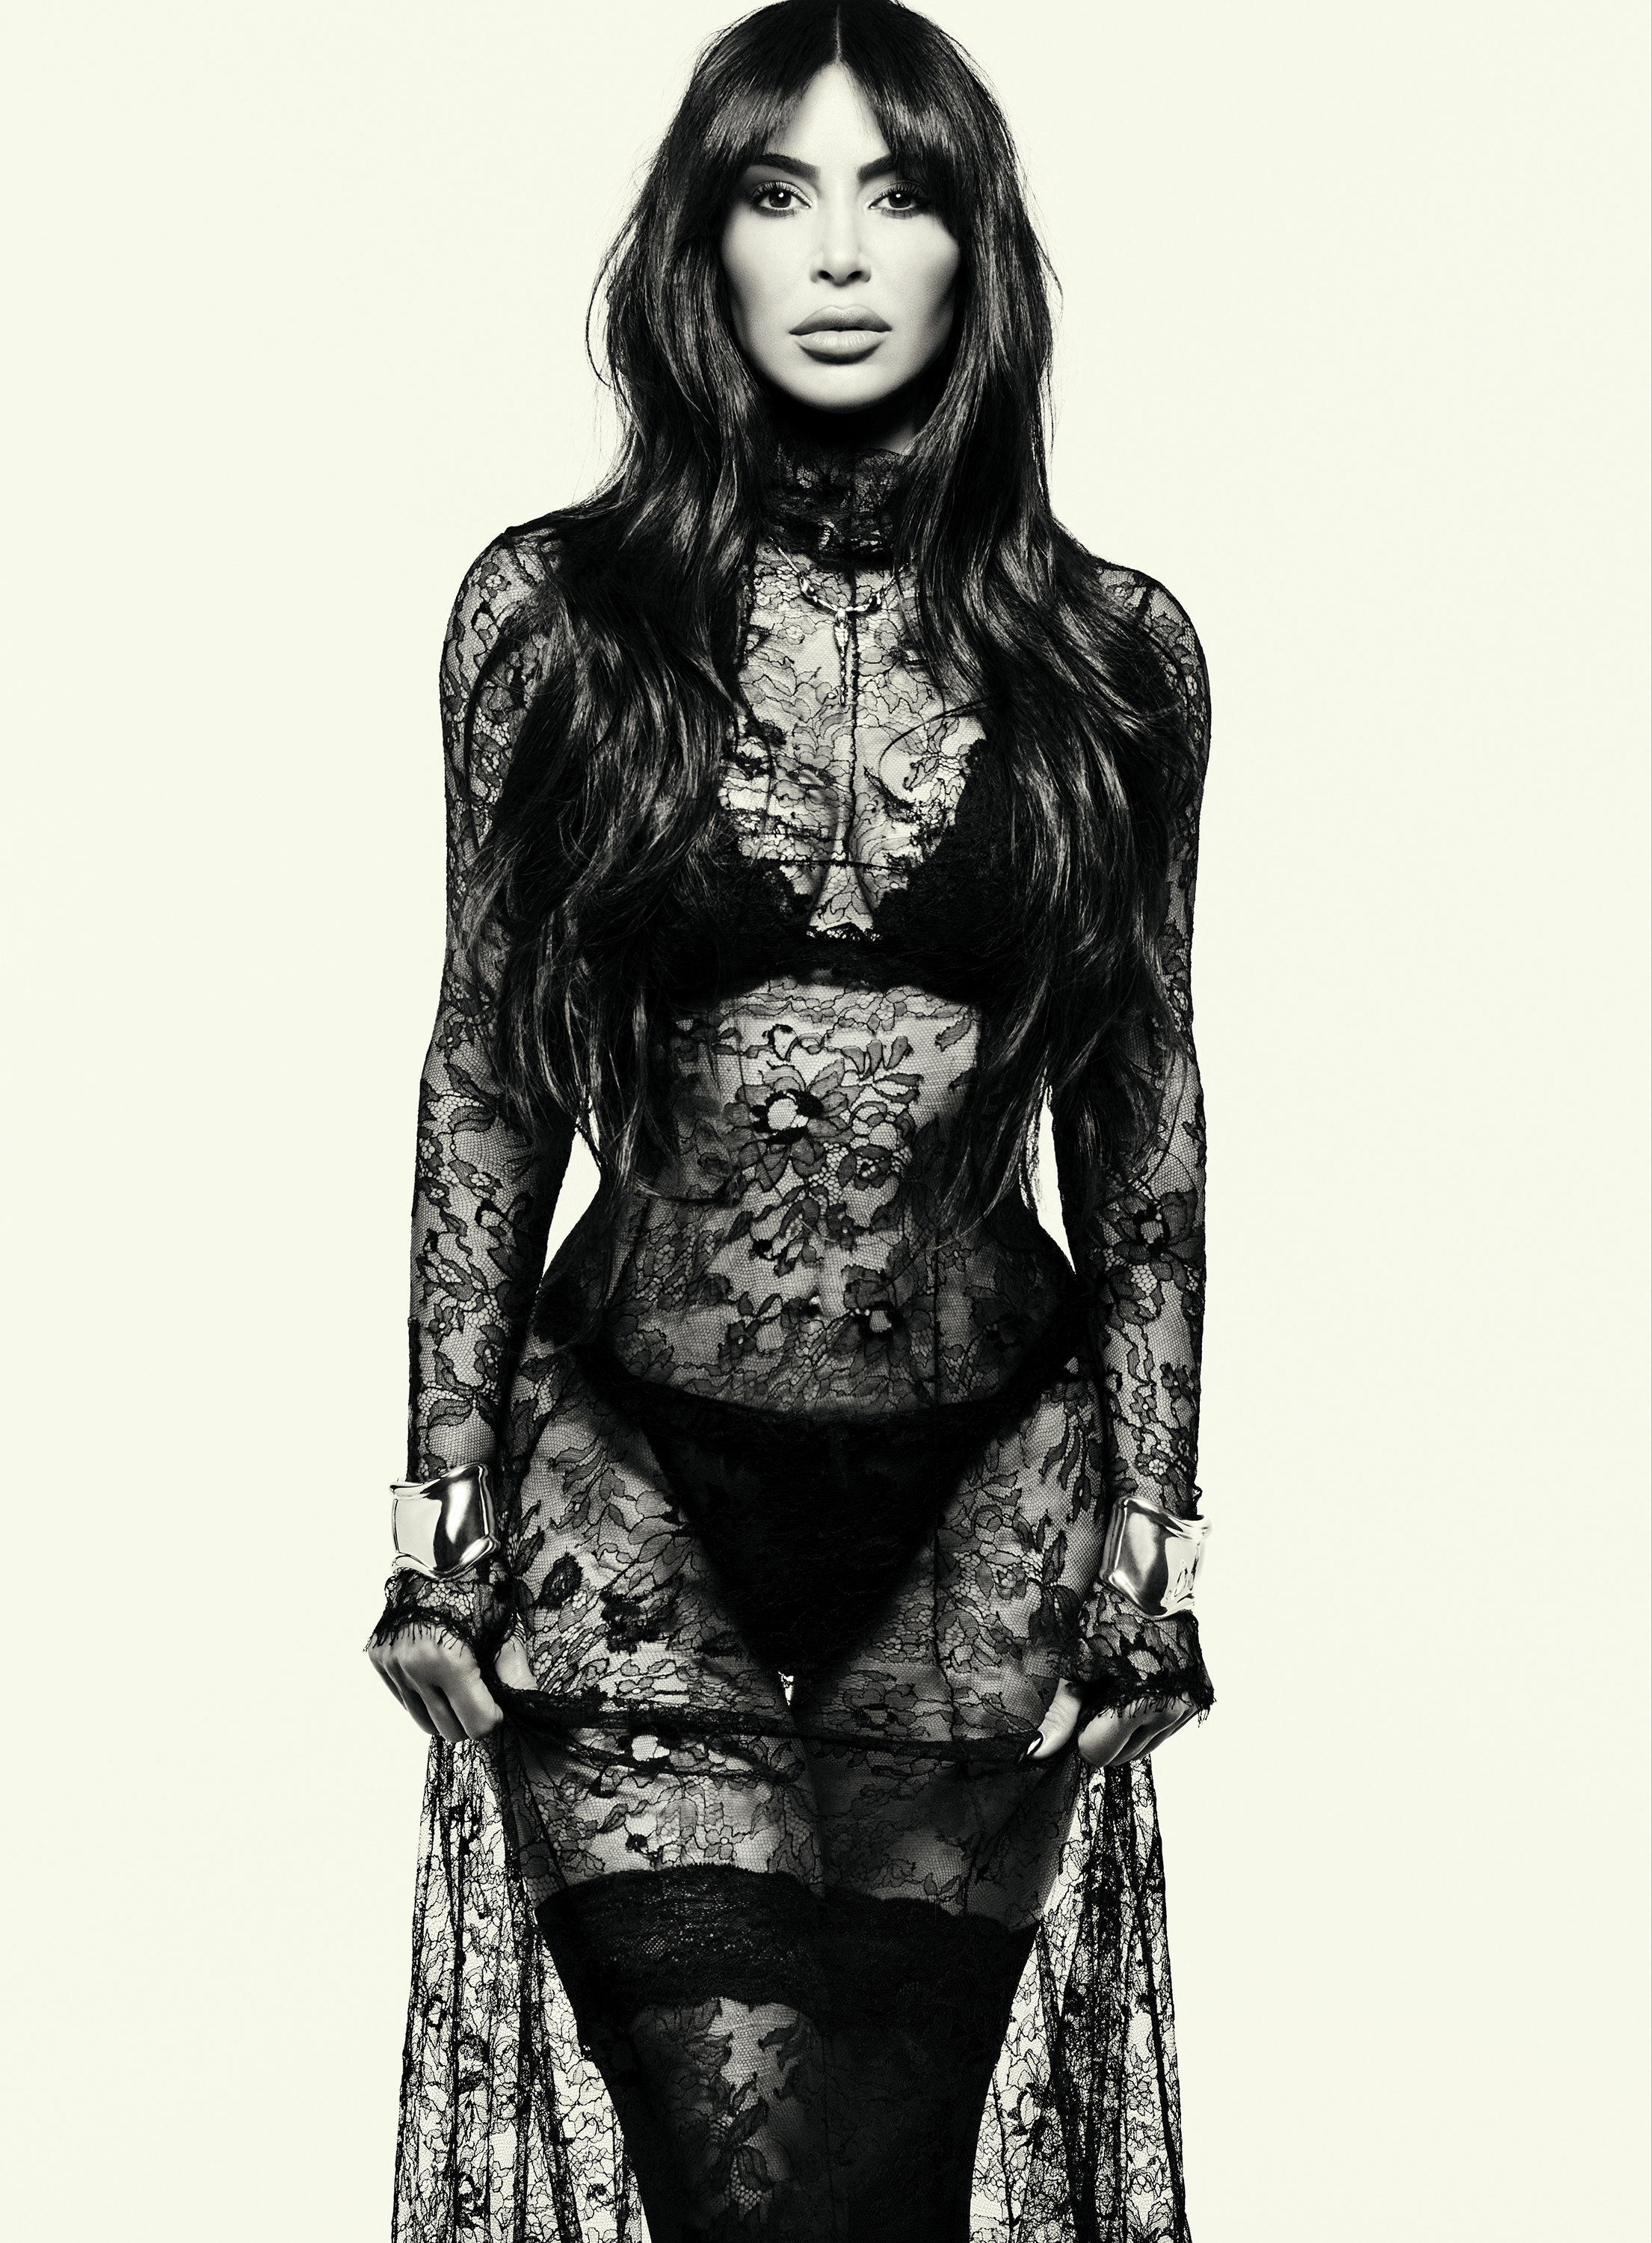 Kim in a lacy, diaphanous outfit